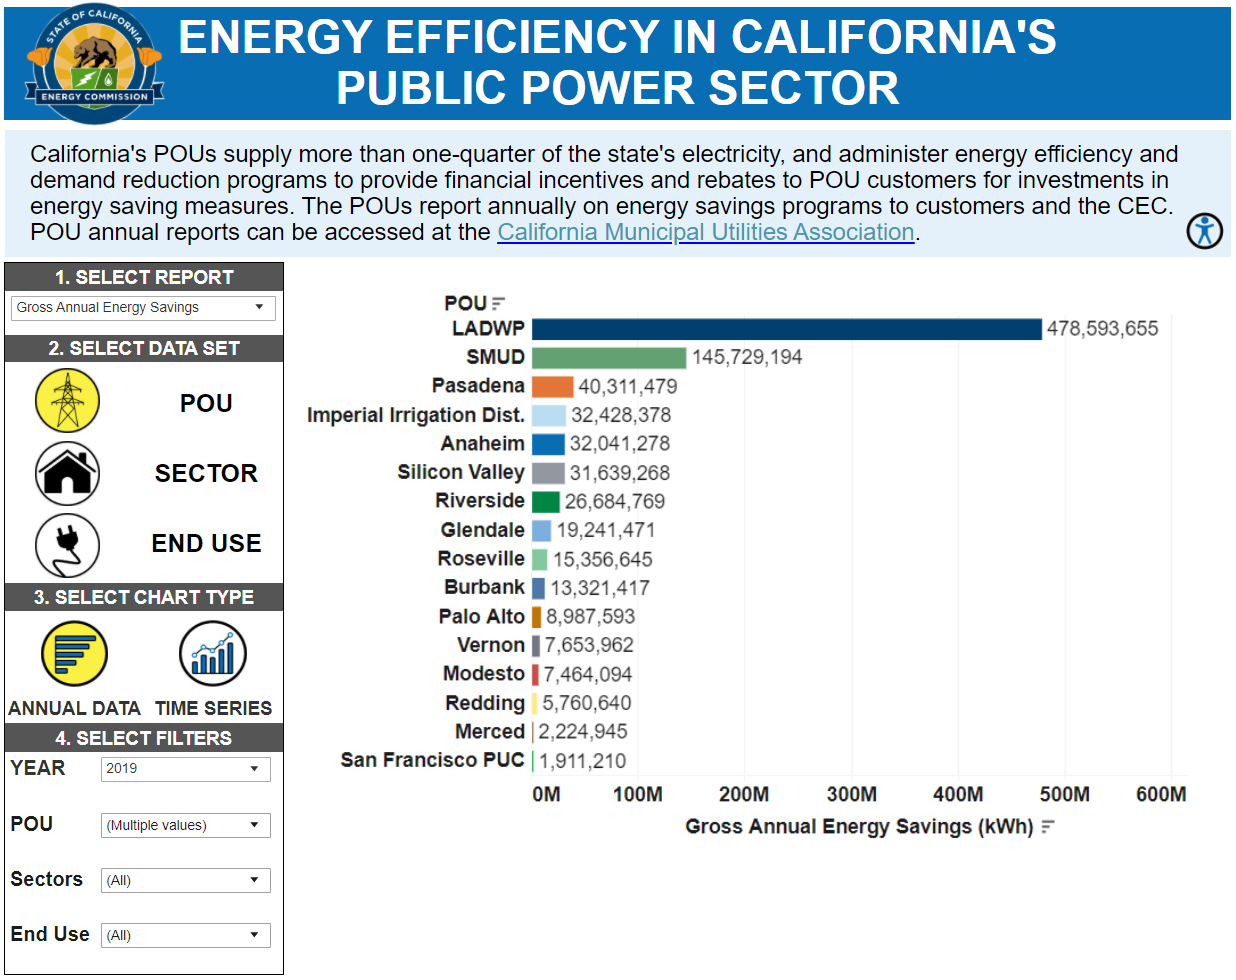 Energy Efficiency in the Public Power Sector - Dashboard